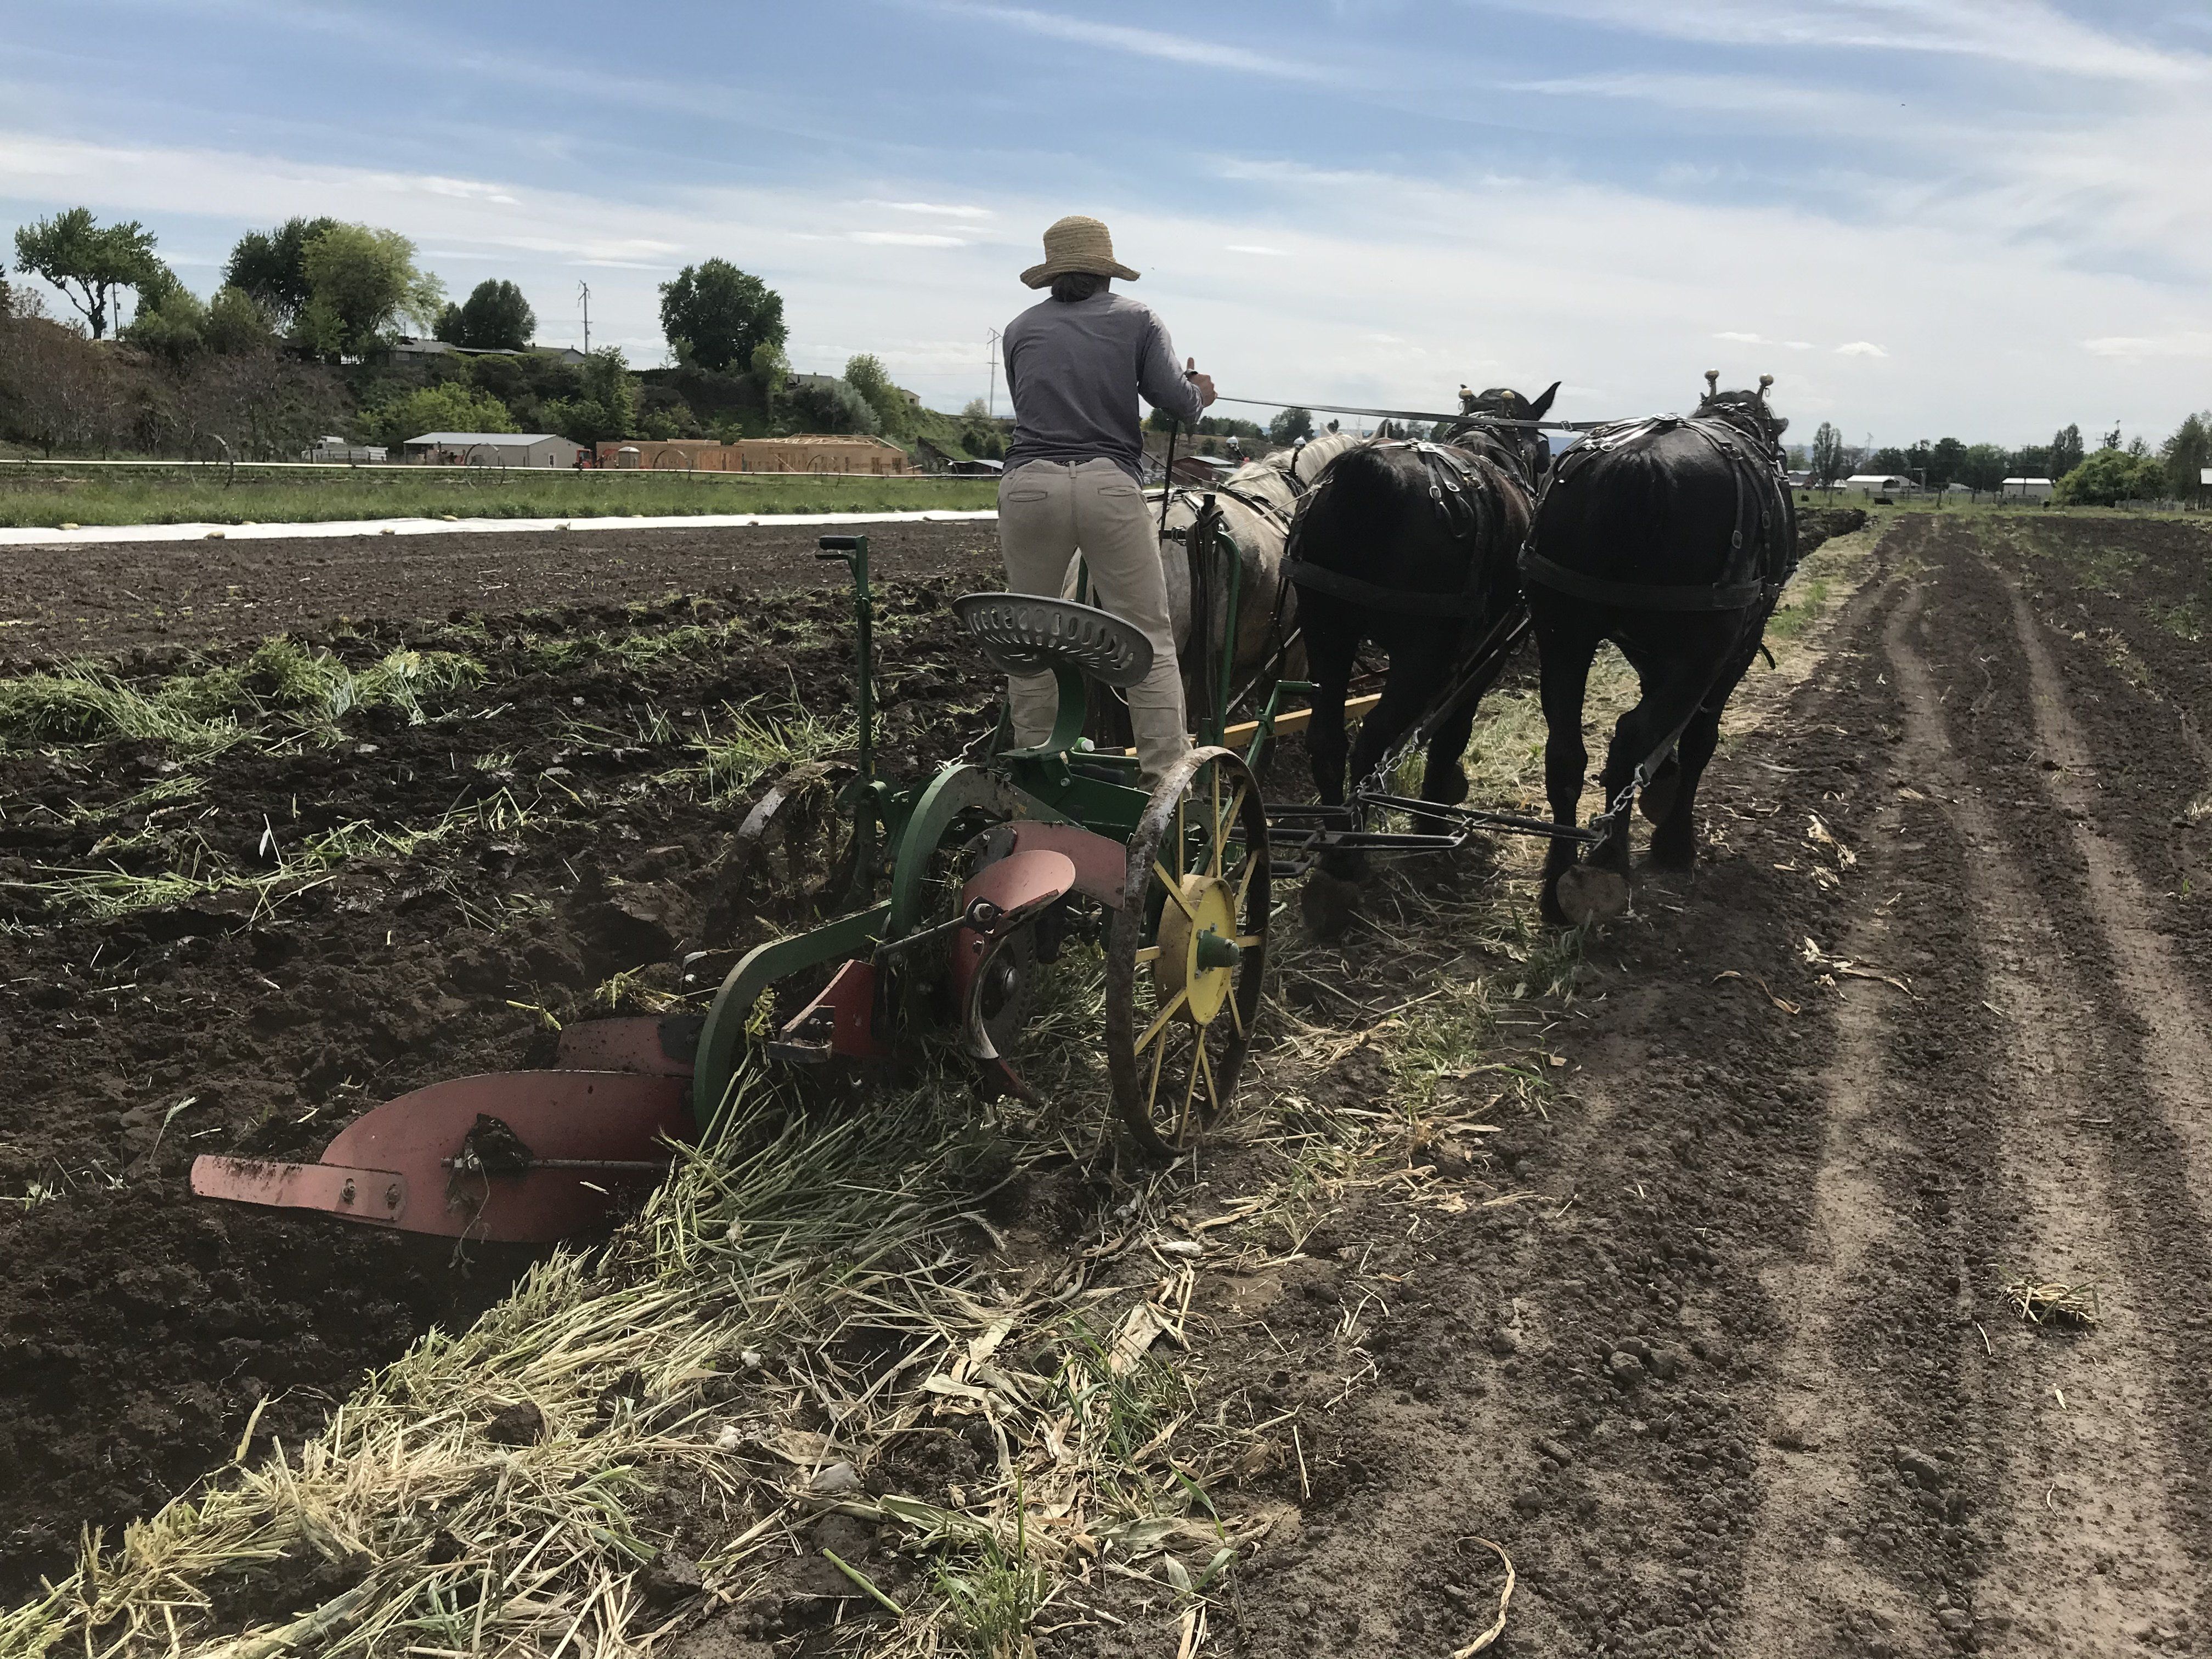 Next Happening: Farm Happenings for May 8, 2020